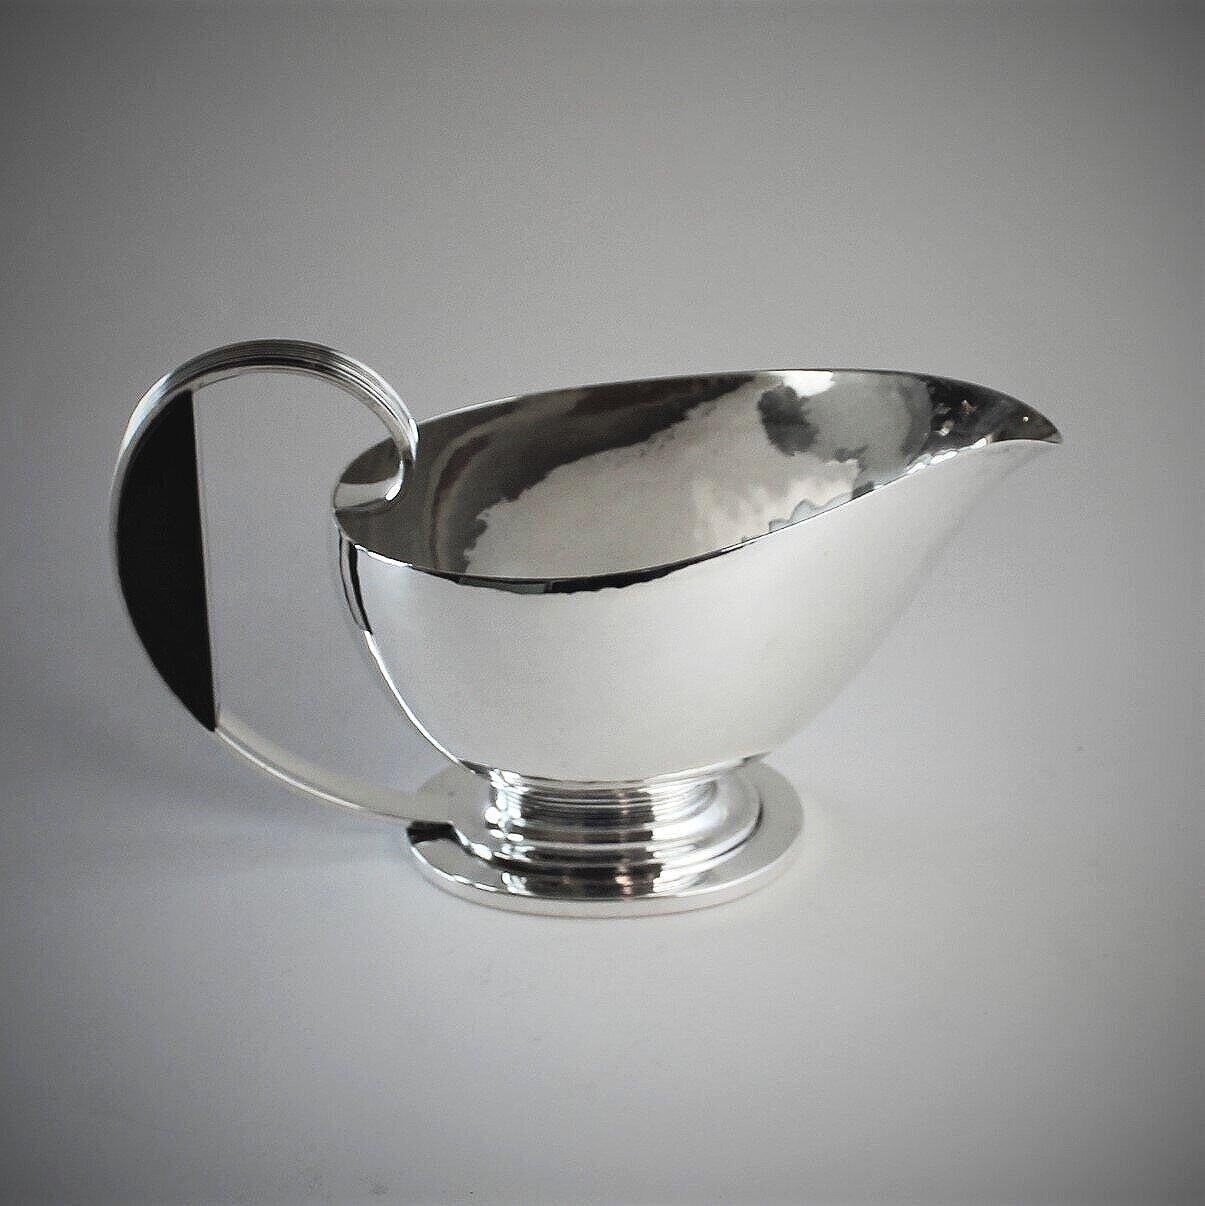 Georg Jensen Sterling silver Art Deco sauce boat with ebony handle, No.766 by Gustav Pedersen.

Heavy and the ebony handle acts as an insulator from the heat. 

Came from an estate of a prominent DC socialite.

A similar example can be seen in